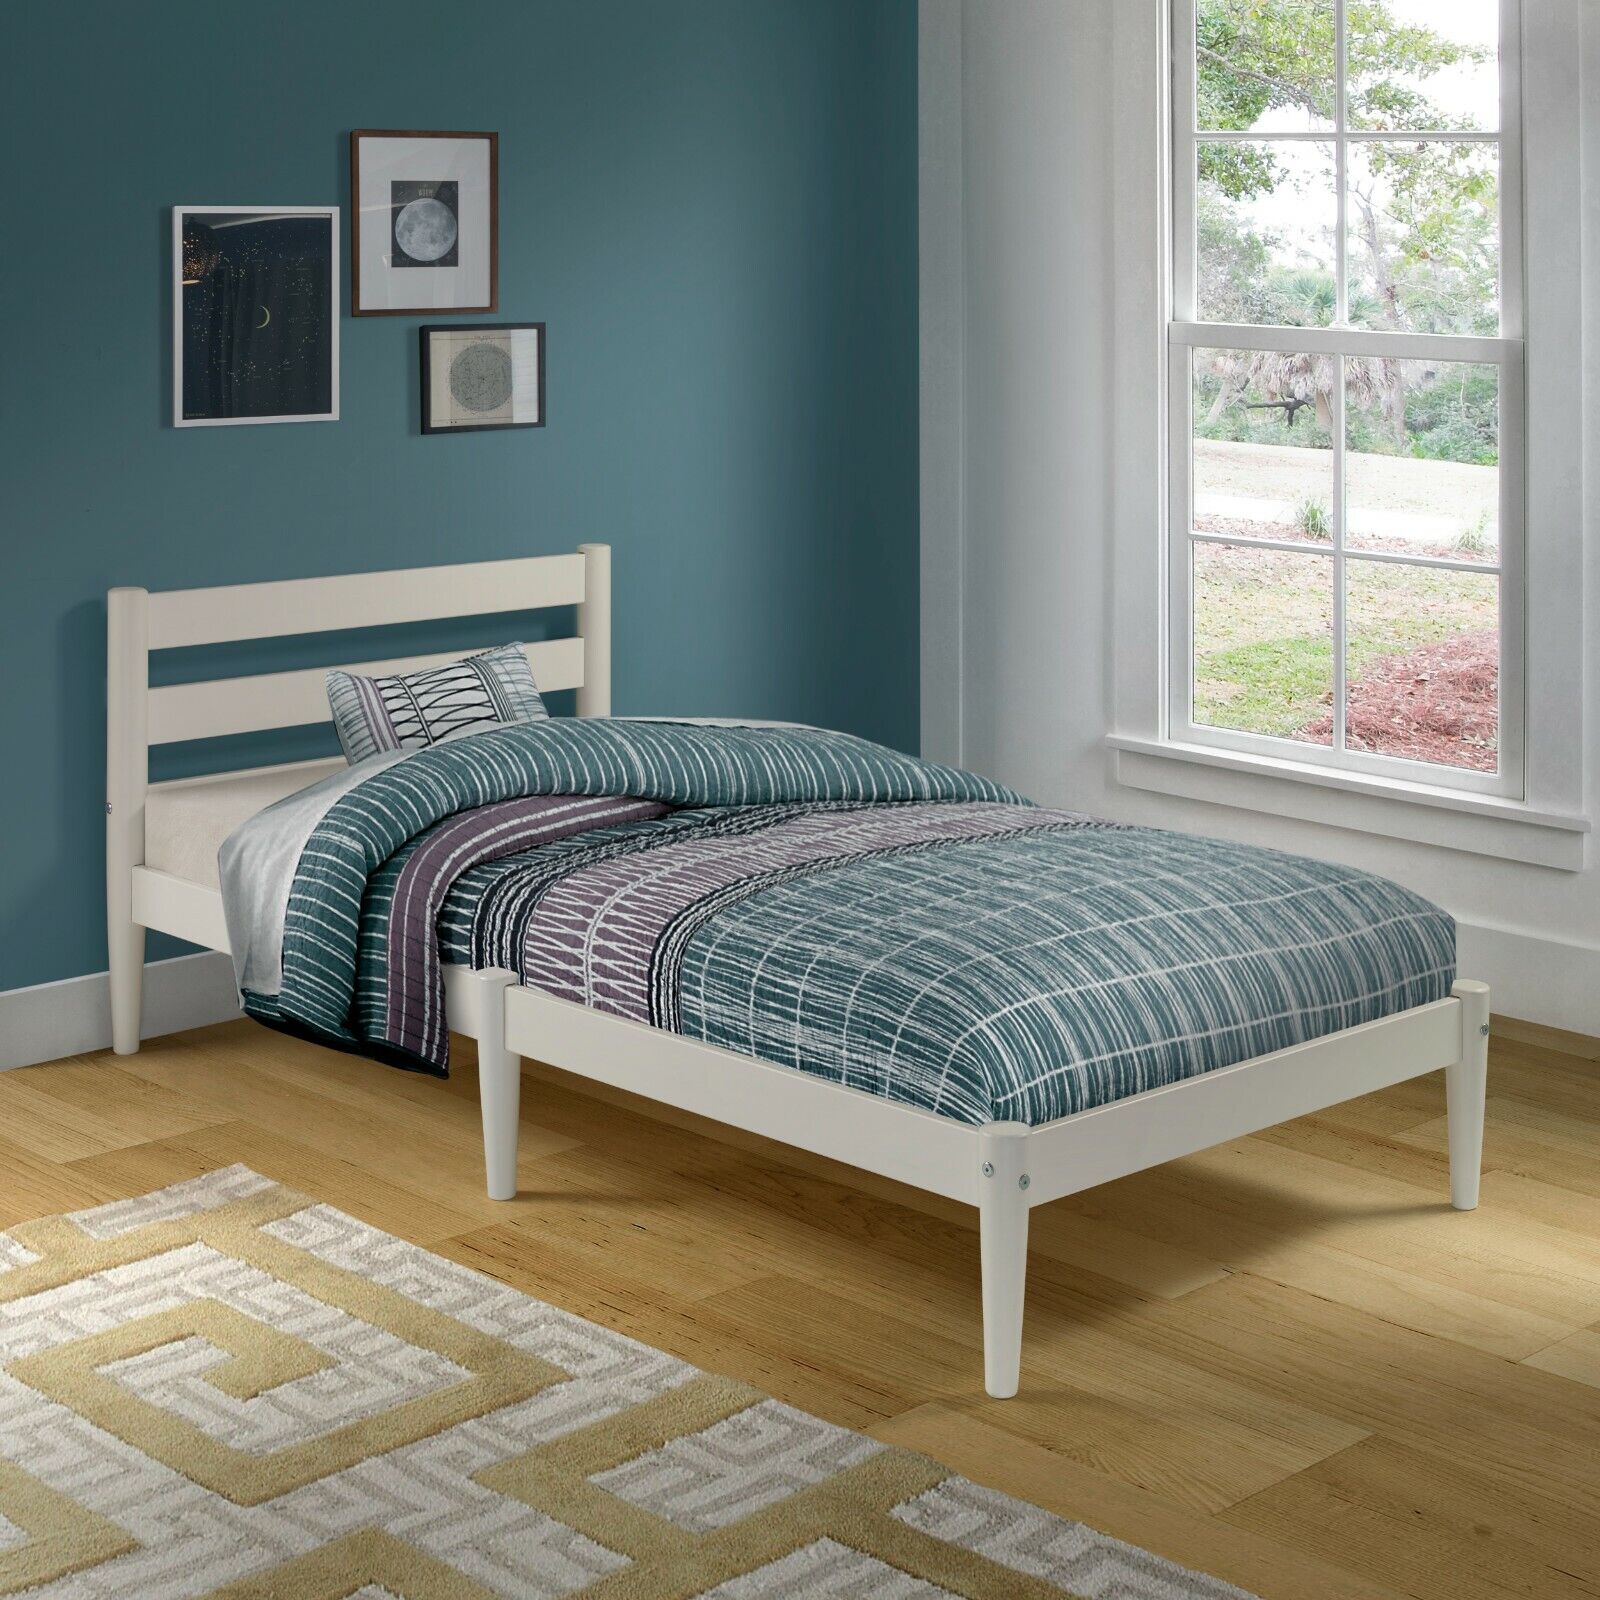 Factory Direct Solid Wood MidCentury Bed Frame - Twin Size